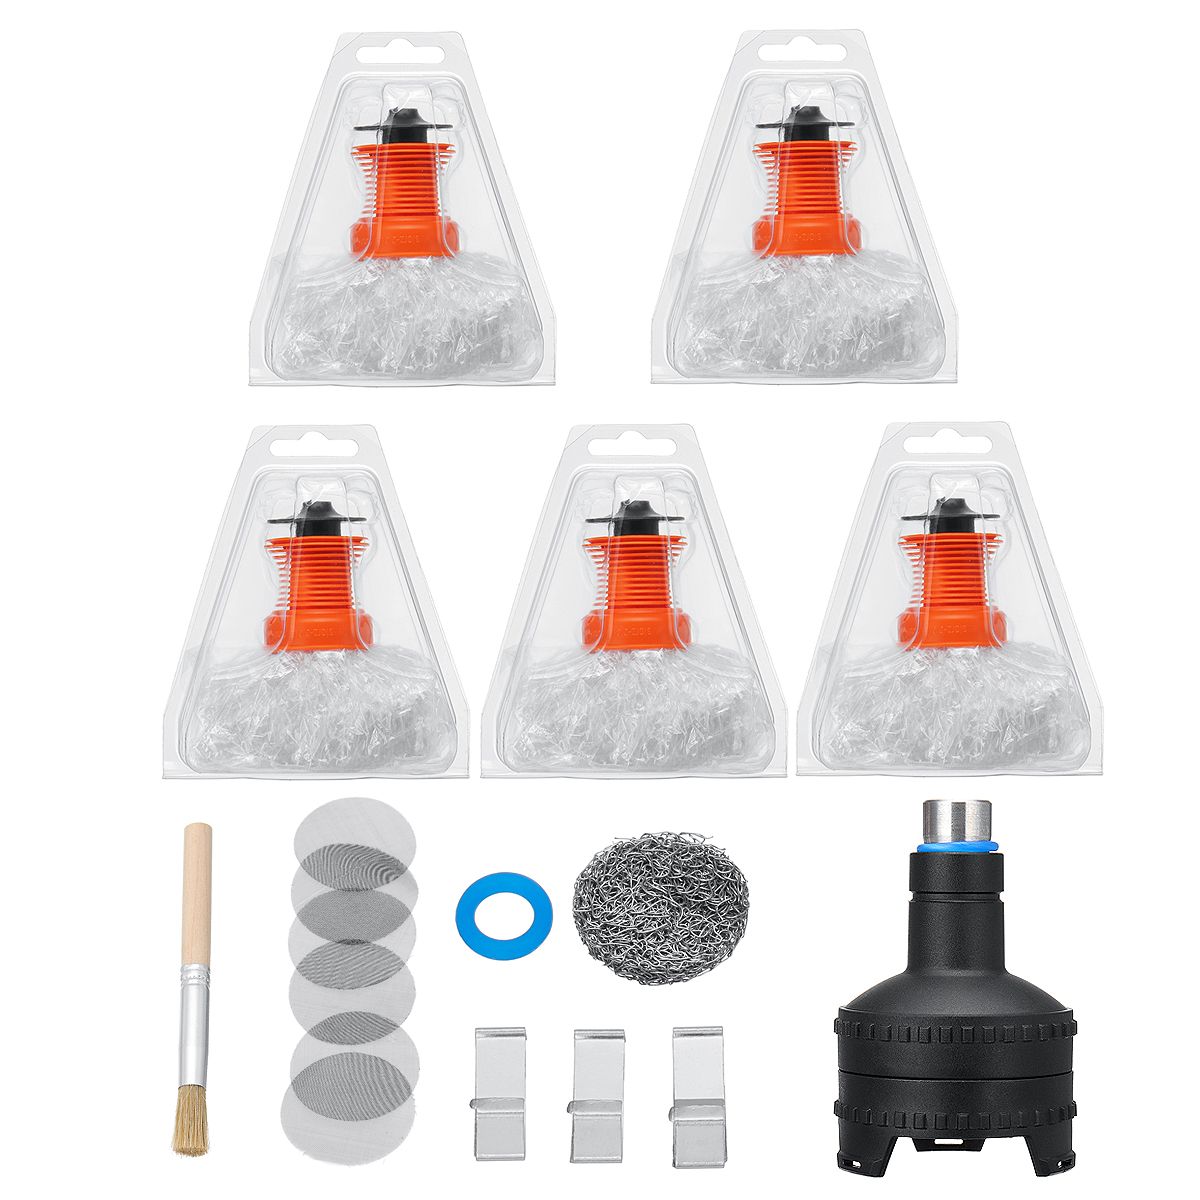 Lot-Replacement-Heat-Filling-Chamber-Balloon-Bag-Adapter-For-Volcano-Easy-Valve-Set-Accessories-1305518